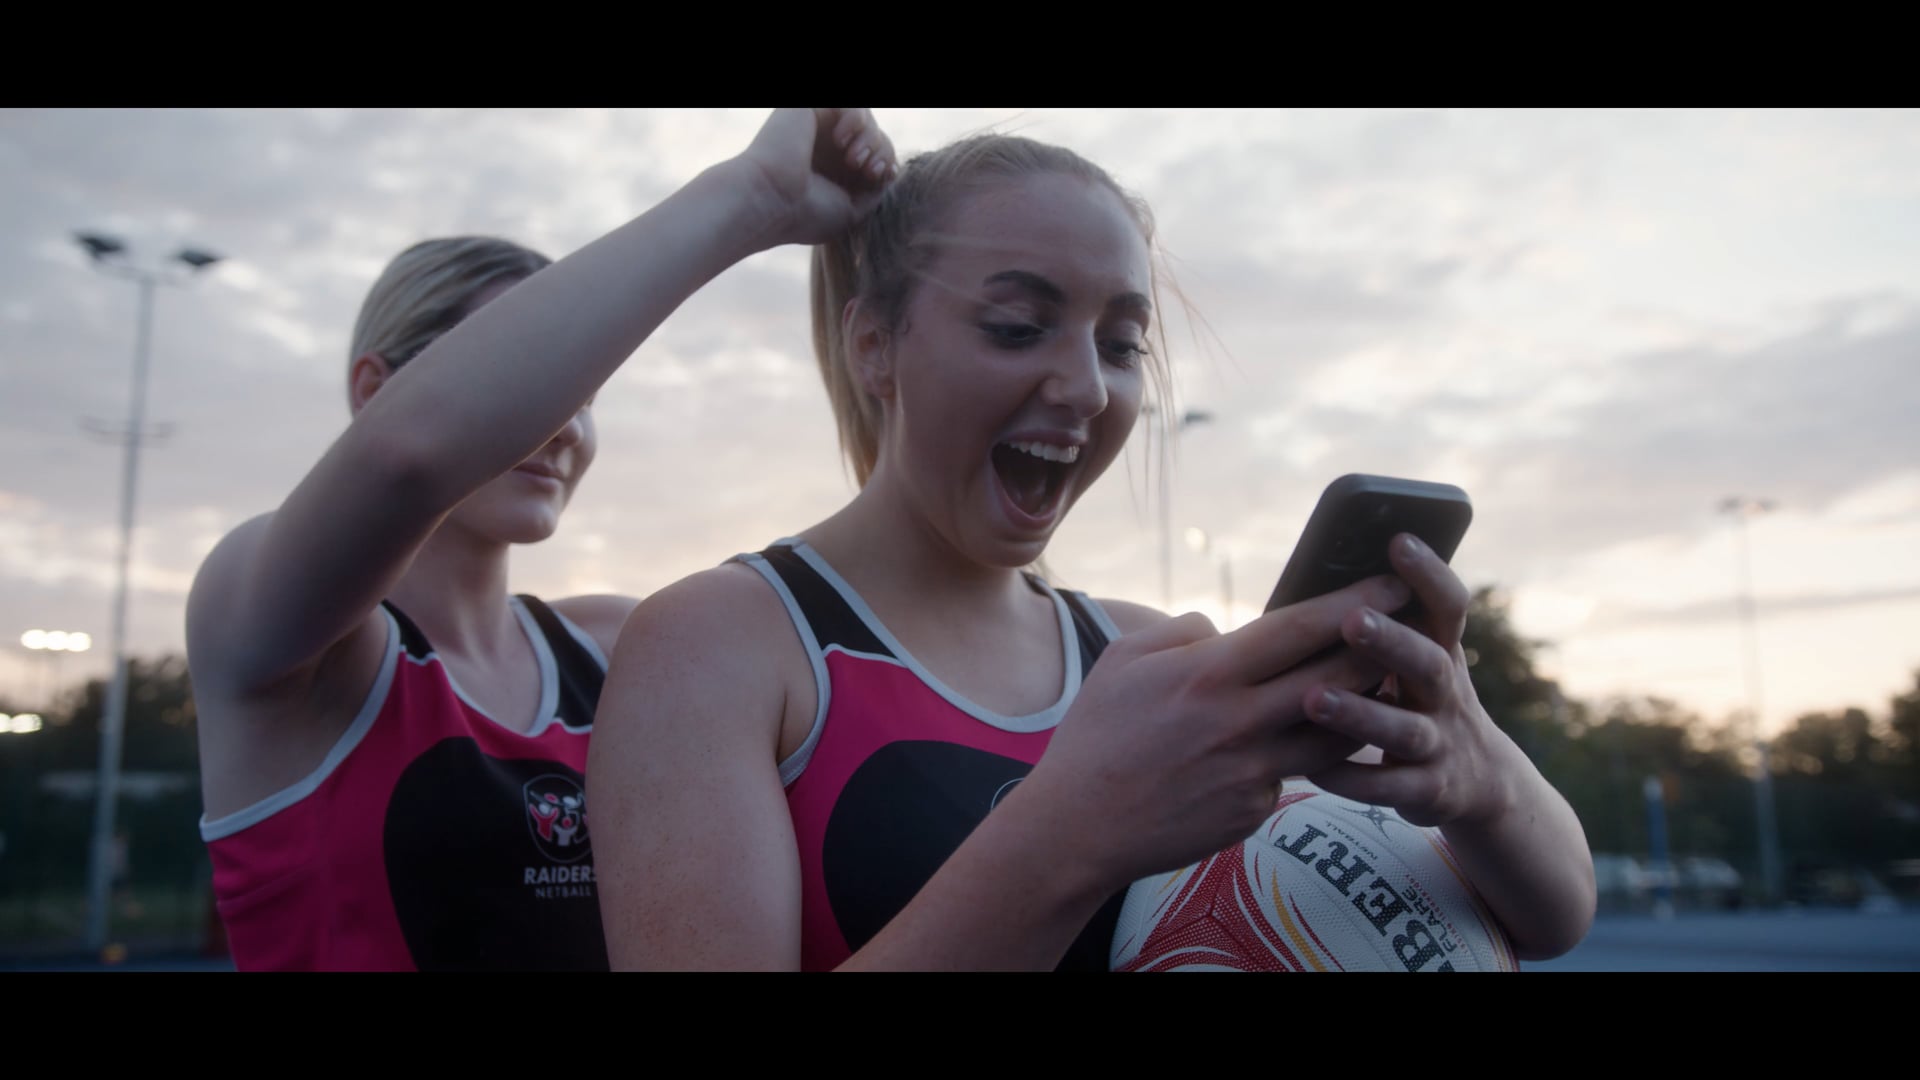 THIS IS OUR TIME | ENGLAND NETBALL